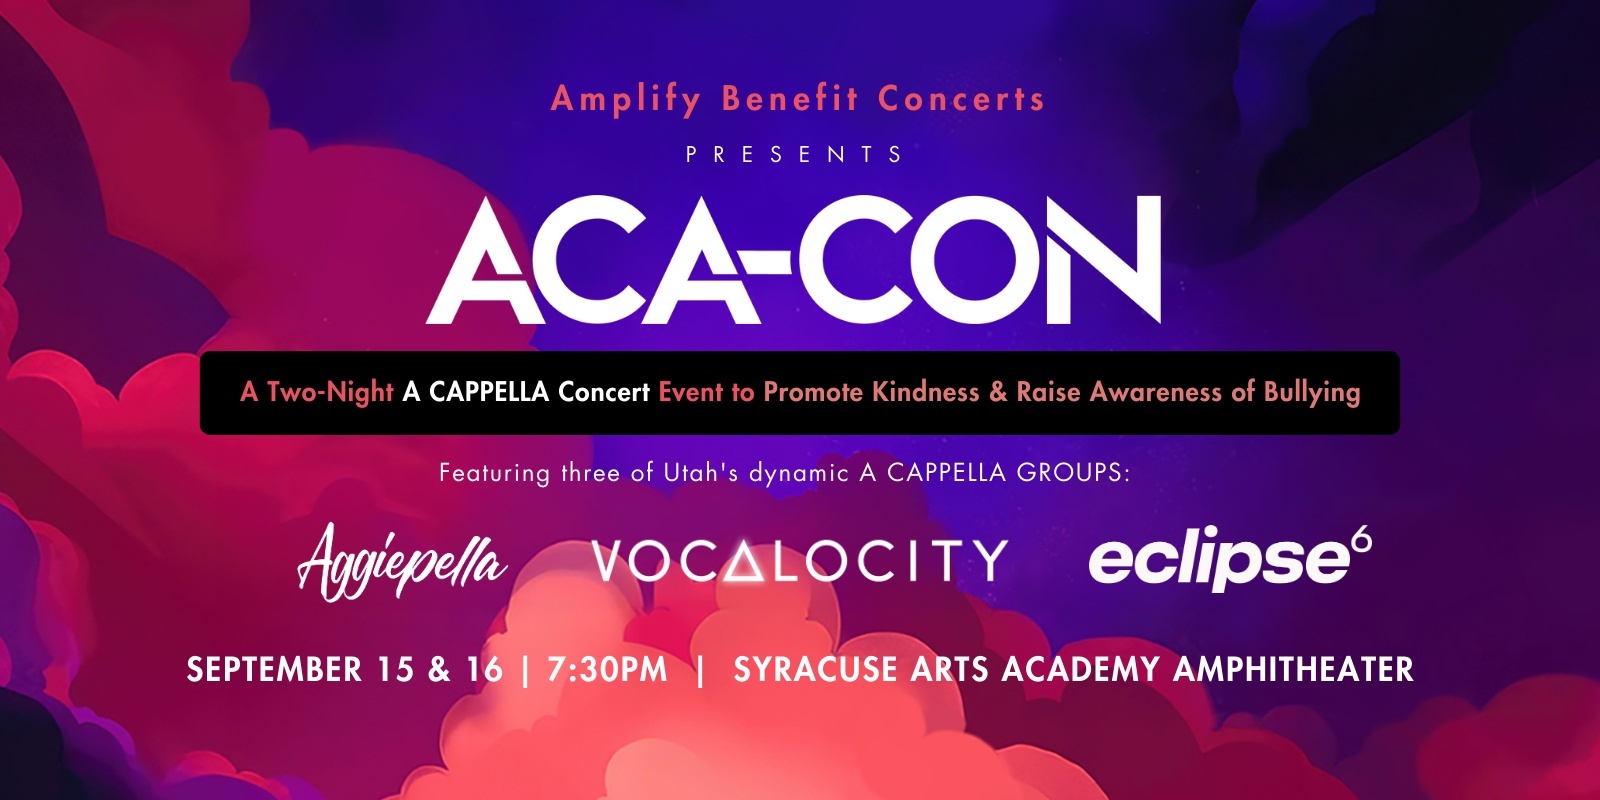 Banner image for ACA-CON: A Two-Night A cappella Concert Event 